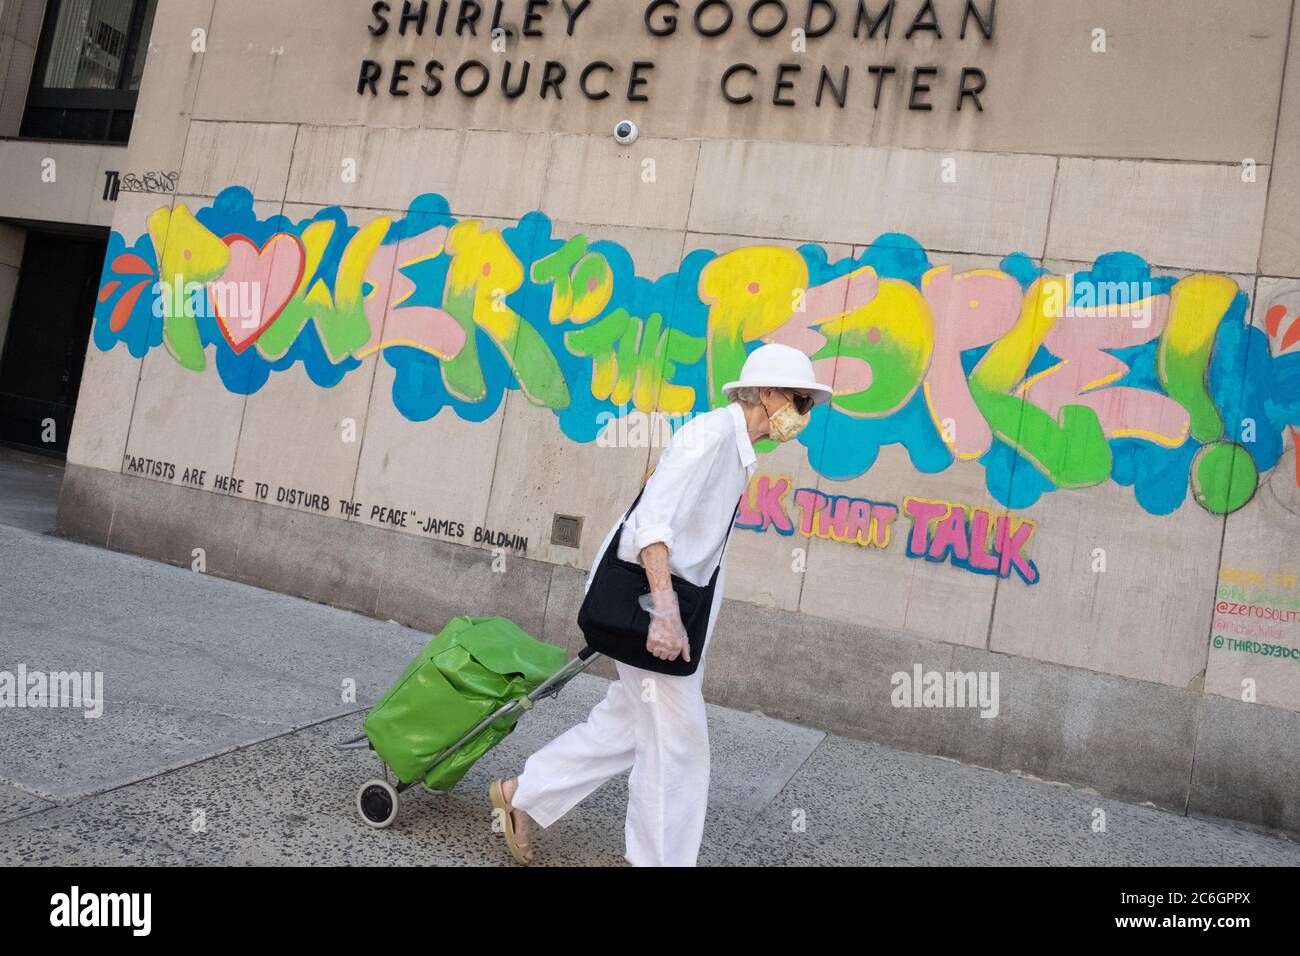 New York, United States. 08th July, 2020. A woman wearing a face mask and glove walks past a mural saying Power to the People as the city enters phase 3 of reopening amid the coronavirus pandemic.As New York City enters phase 3 of reopening retail stores for indoor shopping, restaurants have been postponed for indoor dinning. Meanwhile Black Lives Matter protests continue in the city as the Mayor along with a group of people painted a large Black Lives Matter mural in front of Trump Tower on 5th Ave. Credit: SOPA Images Limited/Alamy Live News Stock Photo